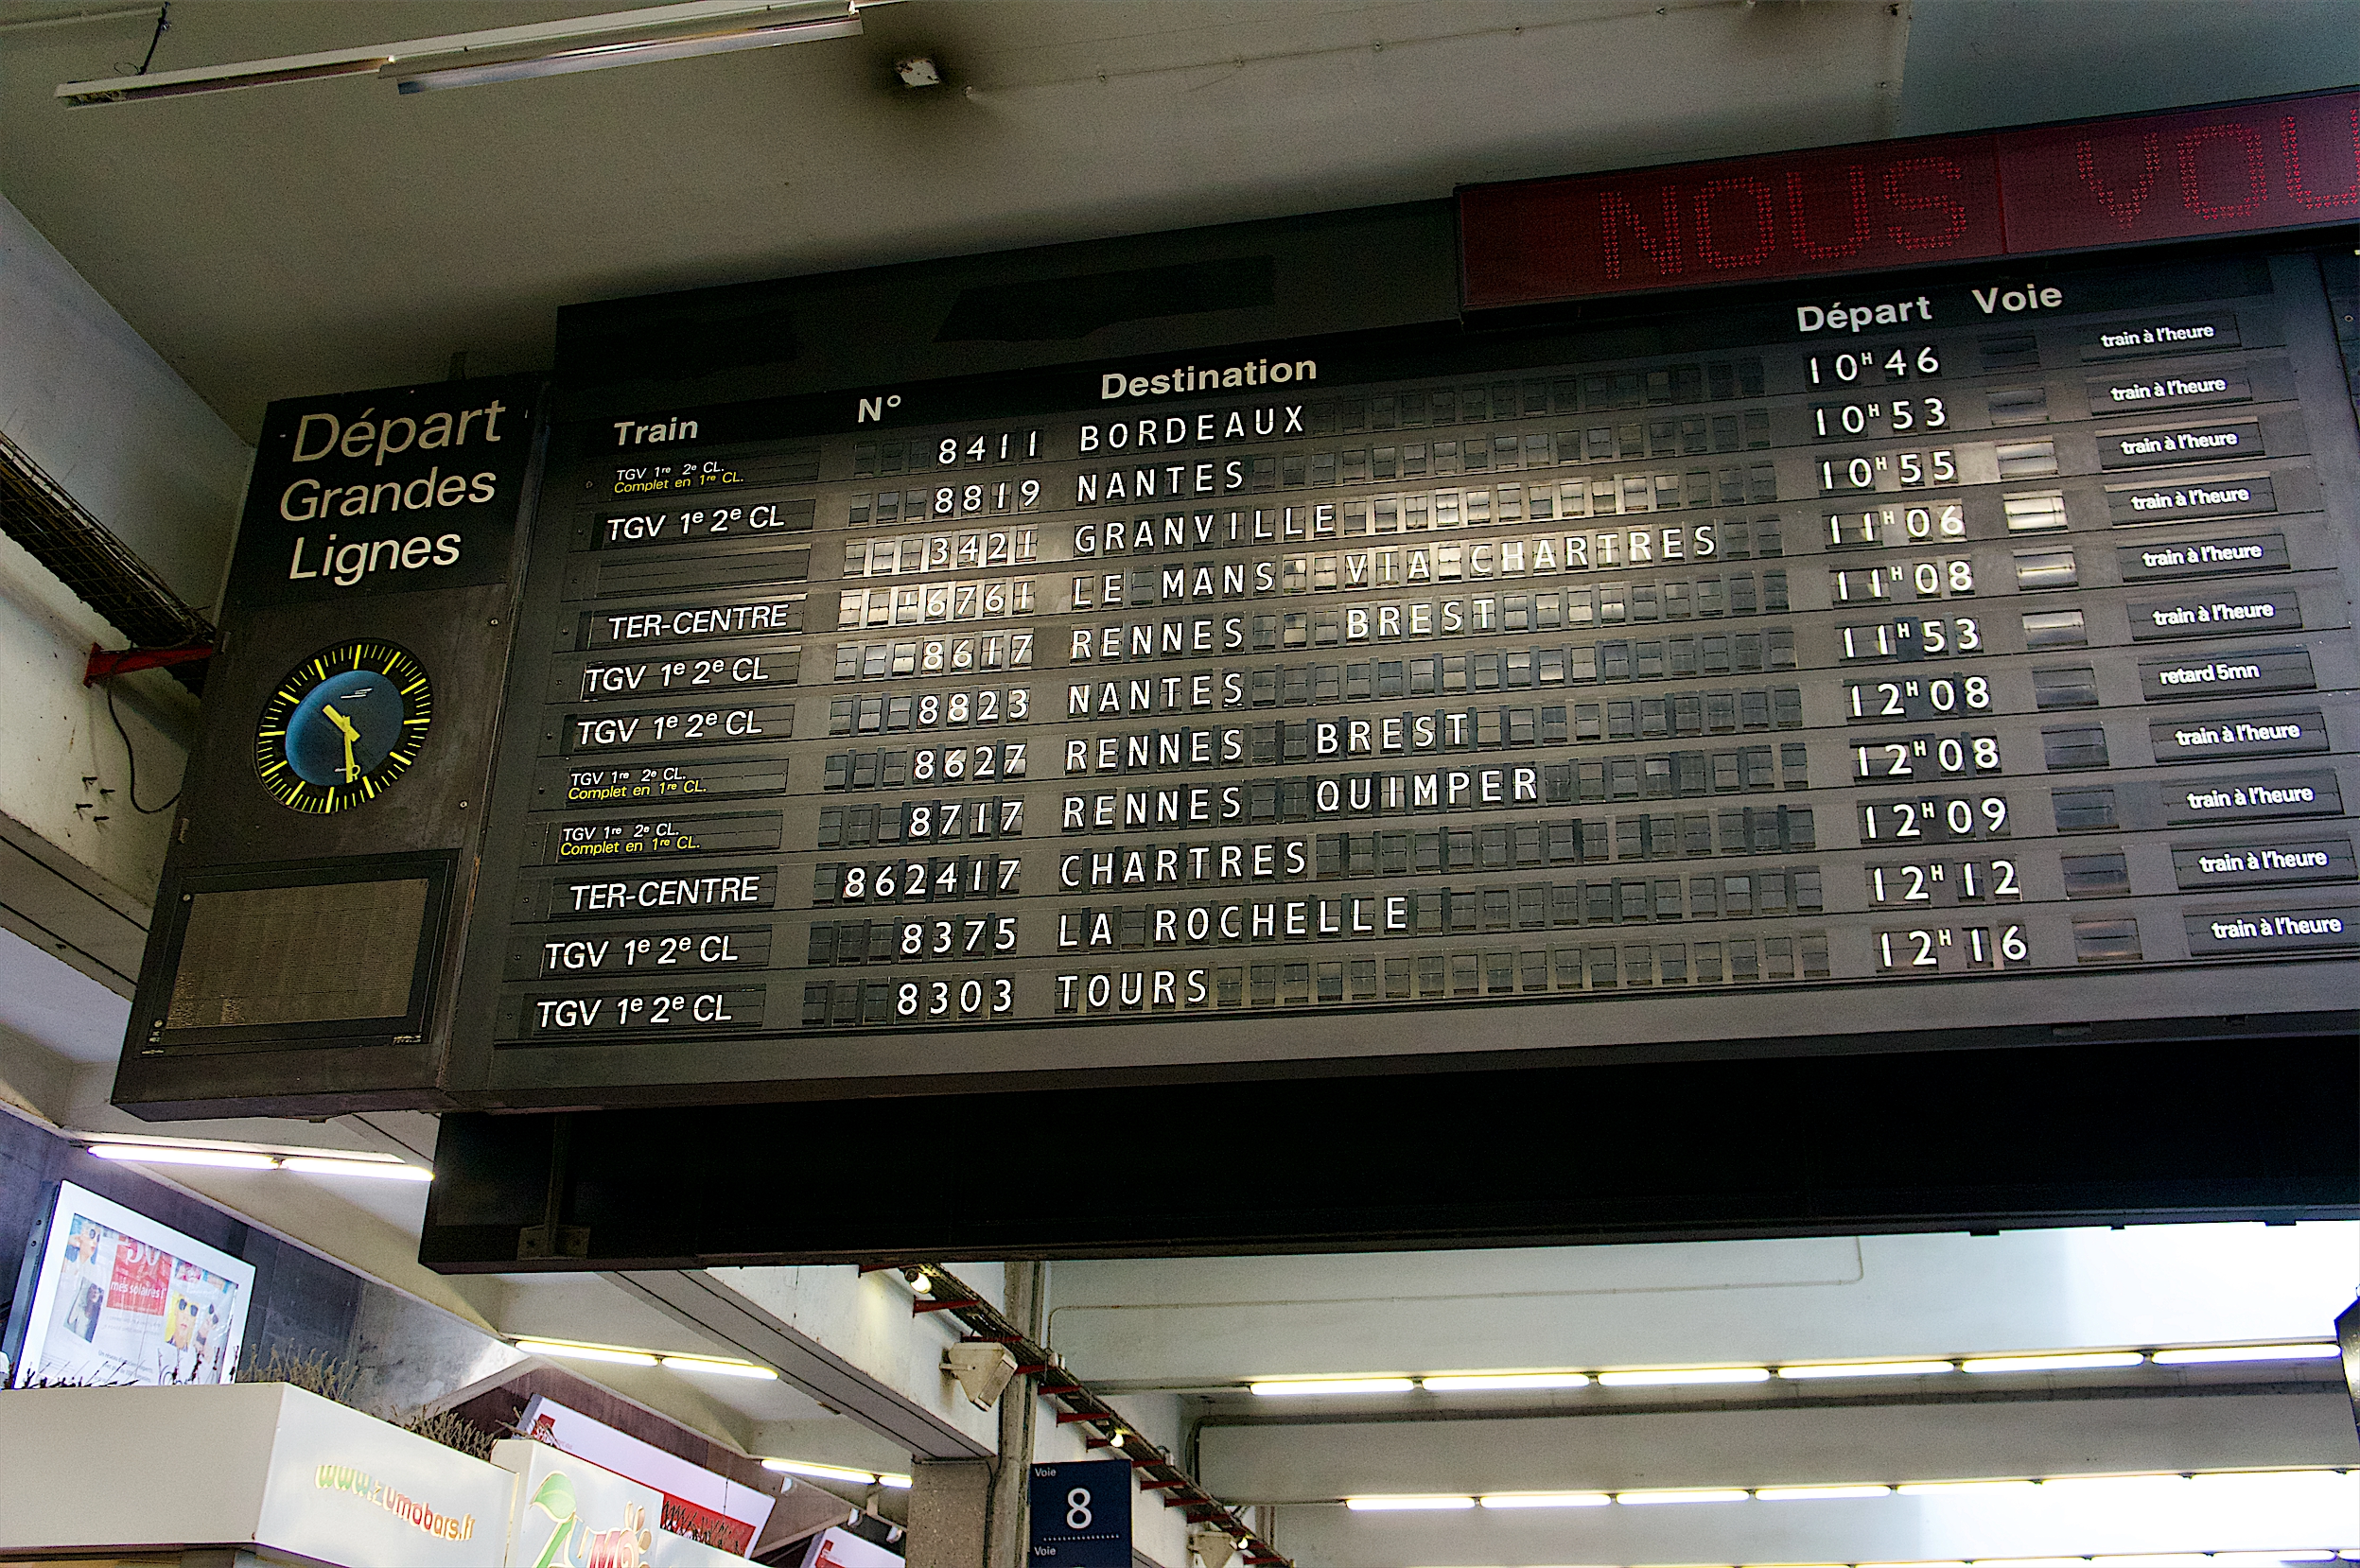 View of a split-flap display board (looking up from below) with times, places, and destinations in French, along with a clock on the left side of the board.